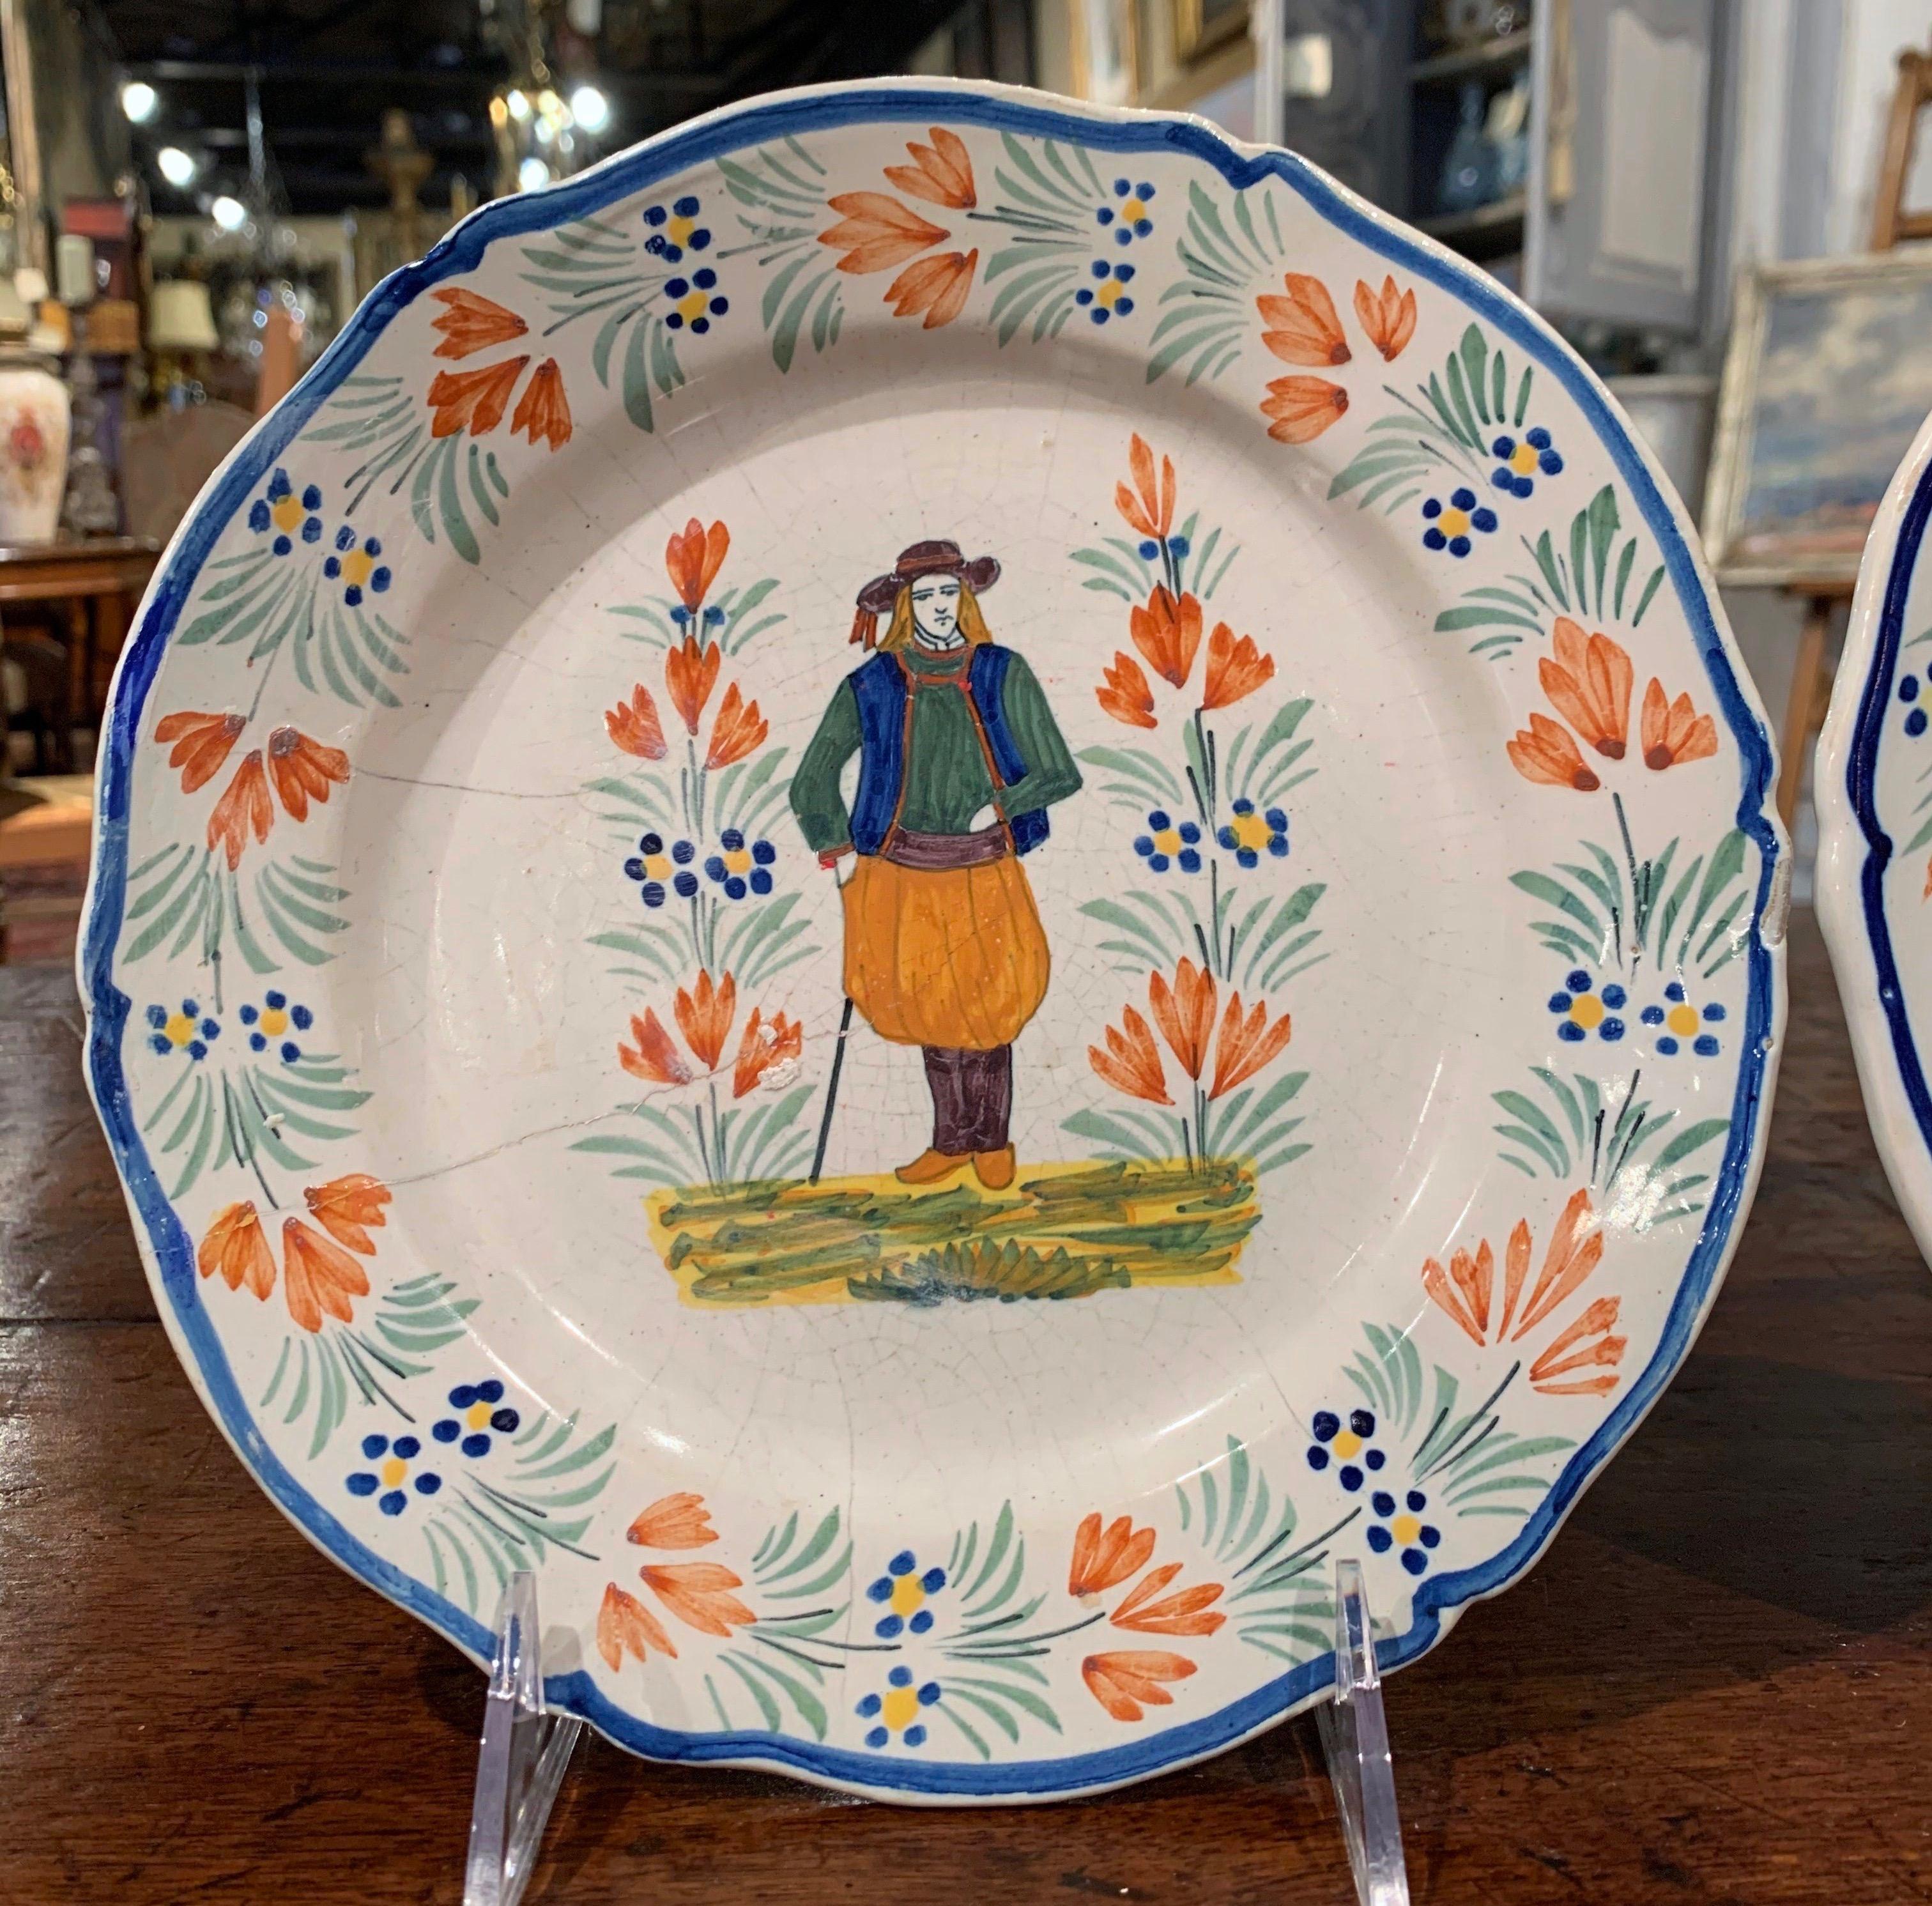 Decorate a shelf with this pair of antique decorative plates from Brittany, France. Crafted circa 1850, each faience plate is hand painted and features Breton people in traditional costumes. The plates are signed on the back Henriot Quimper France